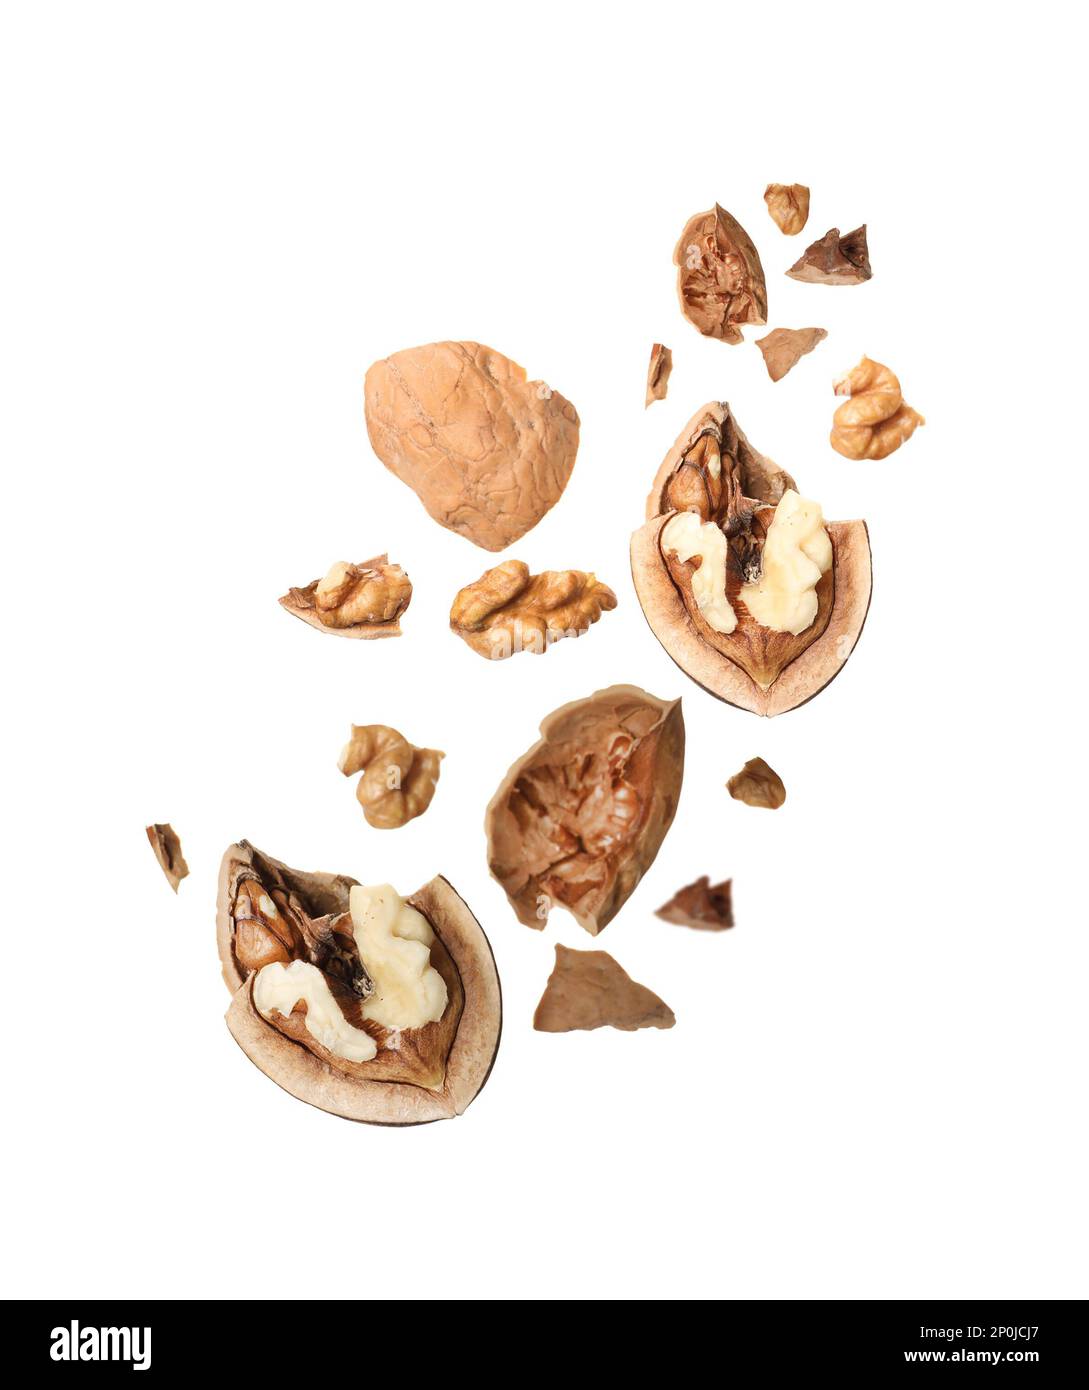 Broken walnut and pieces of shell flying on white background Stock Photo